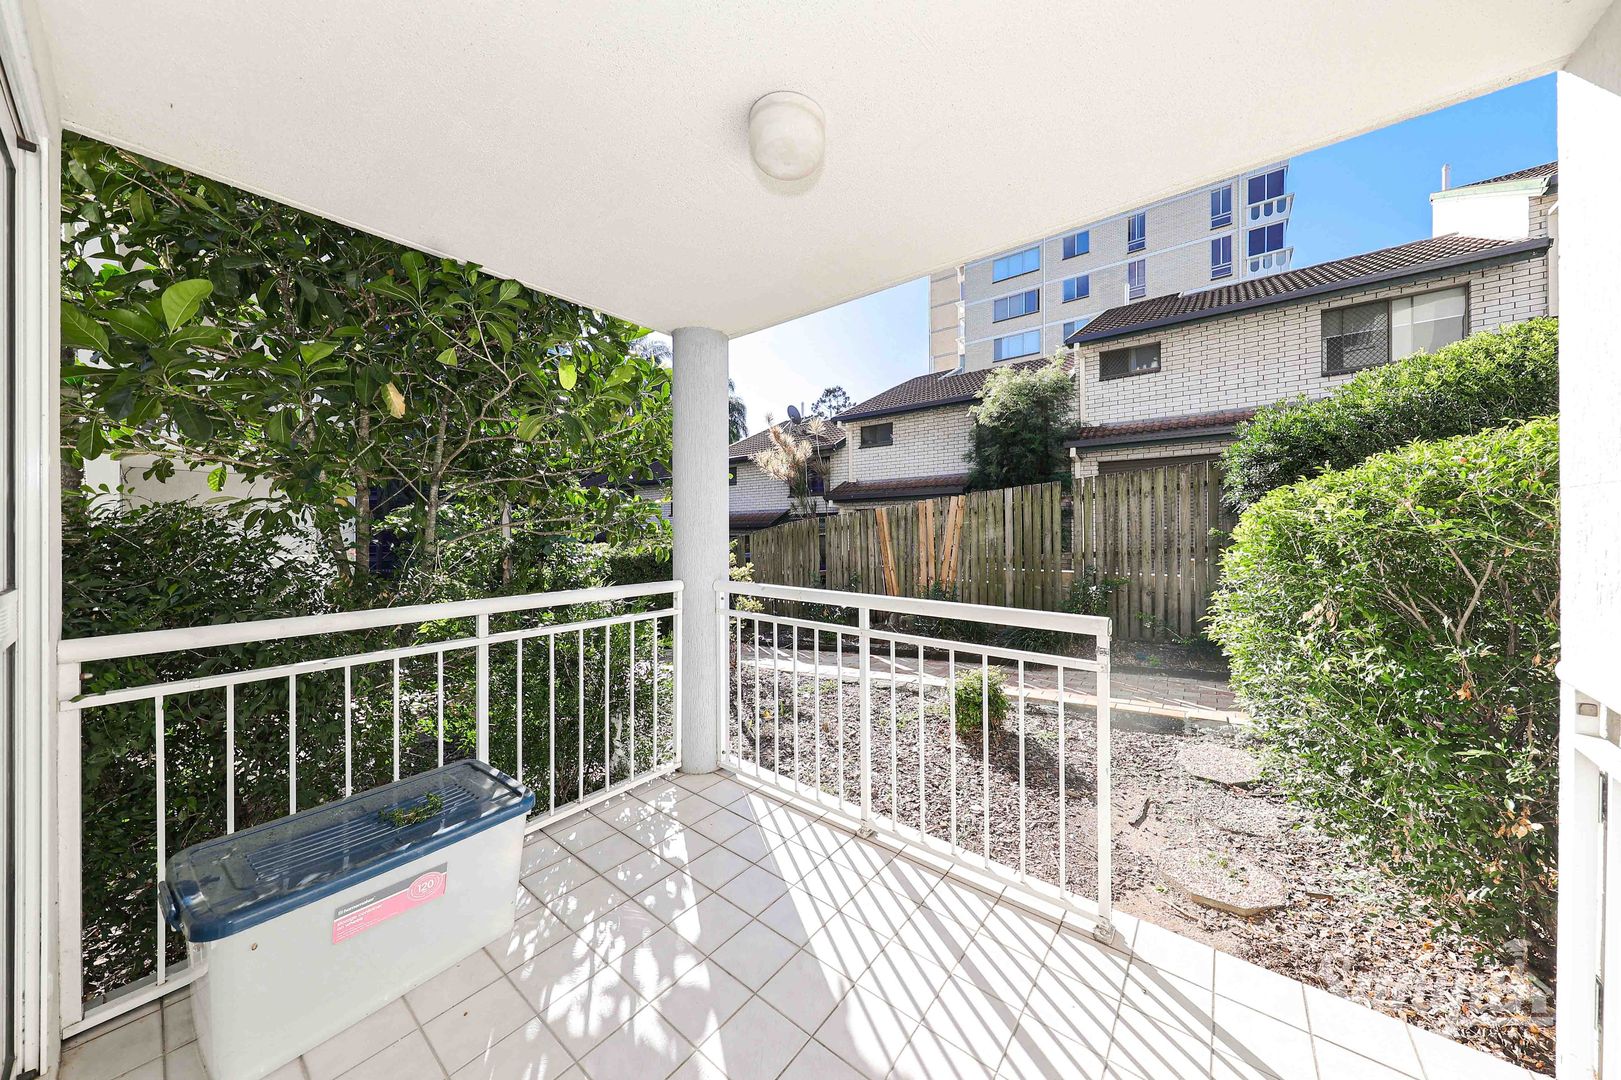 3/92 Station Rd, Indooroopilly QLD 4068, Image 1